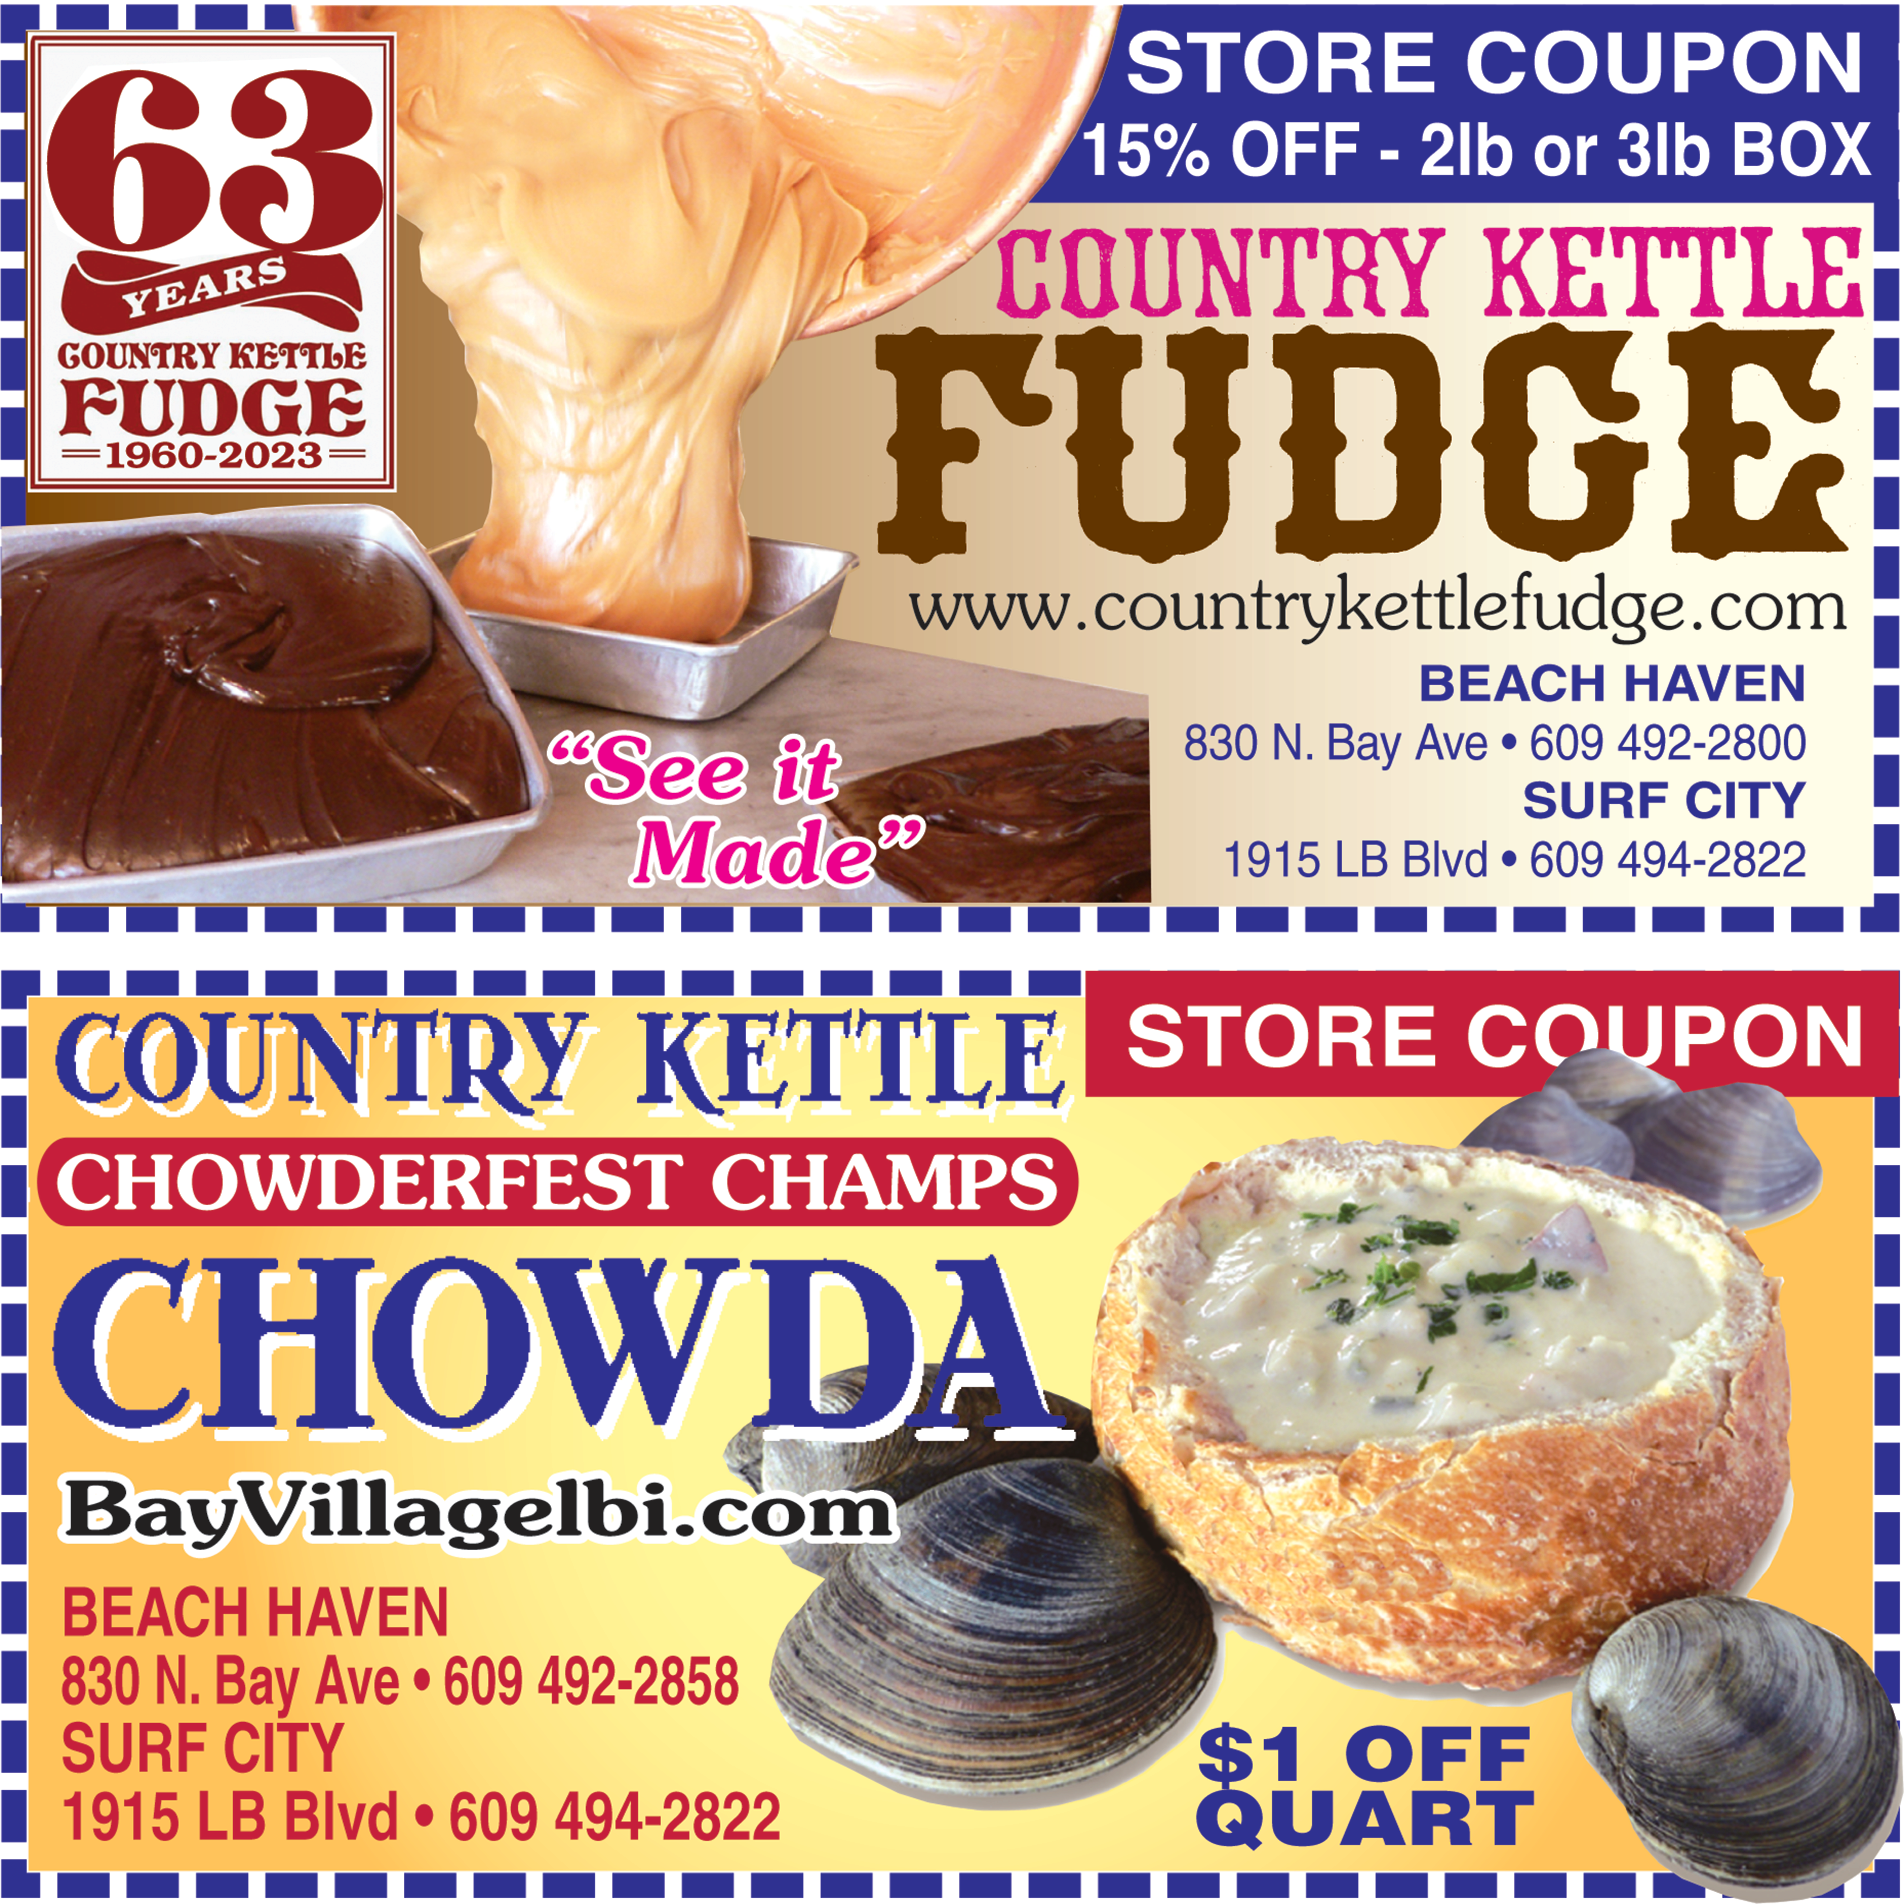 Country Kettle Fudge Print Ad